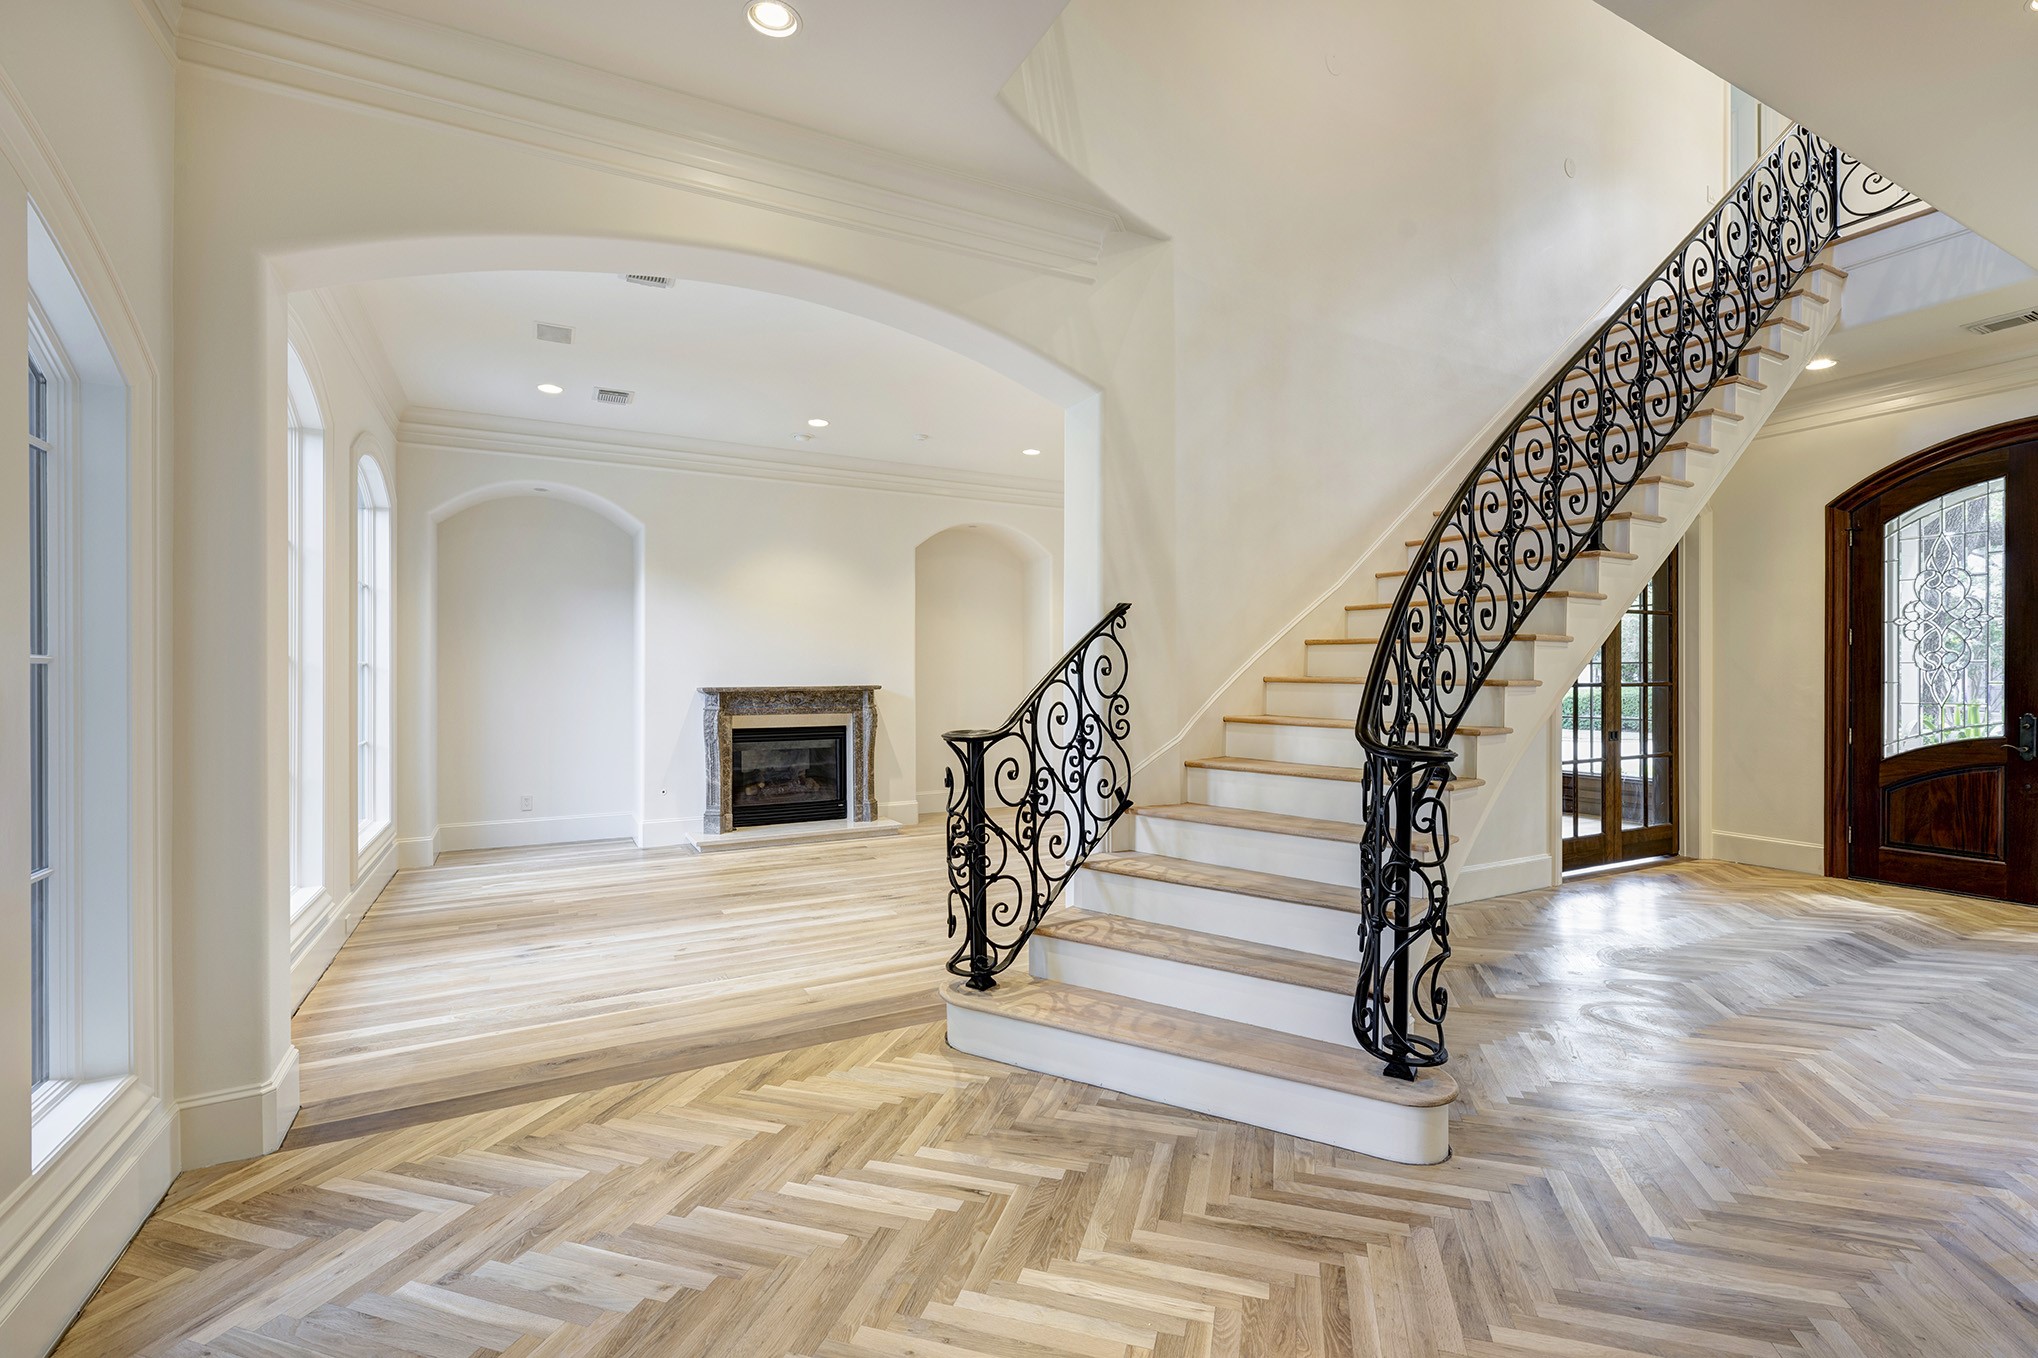 Grand entryway features sweeping staircase and high ceilings.